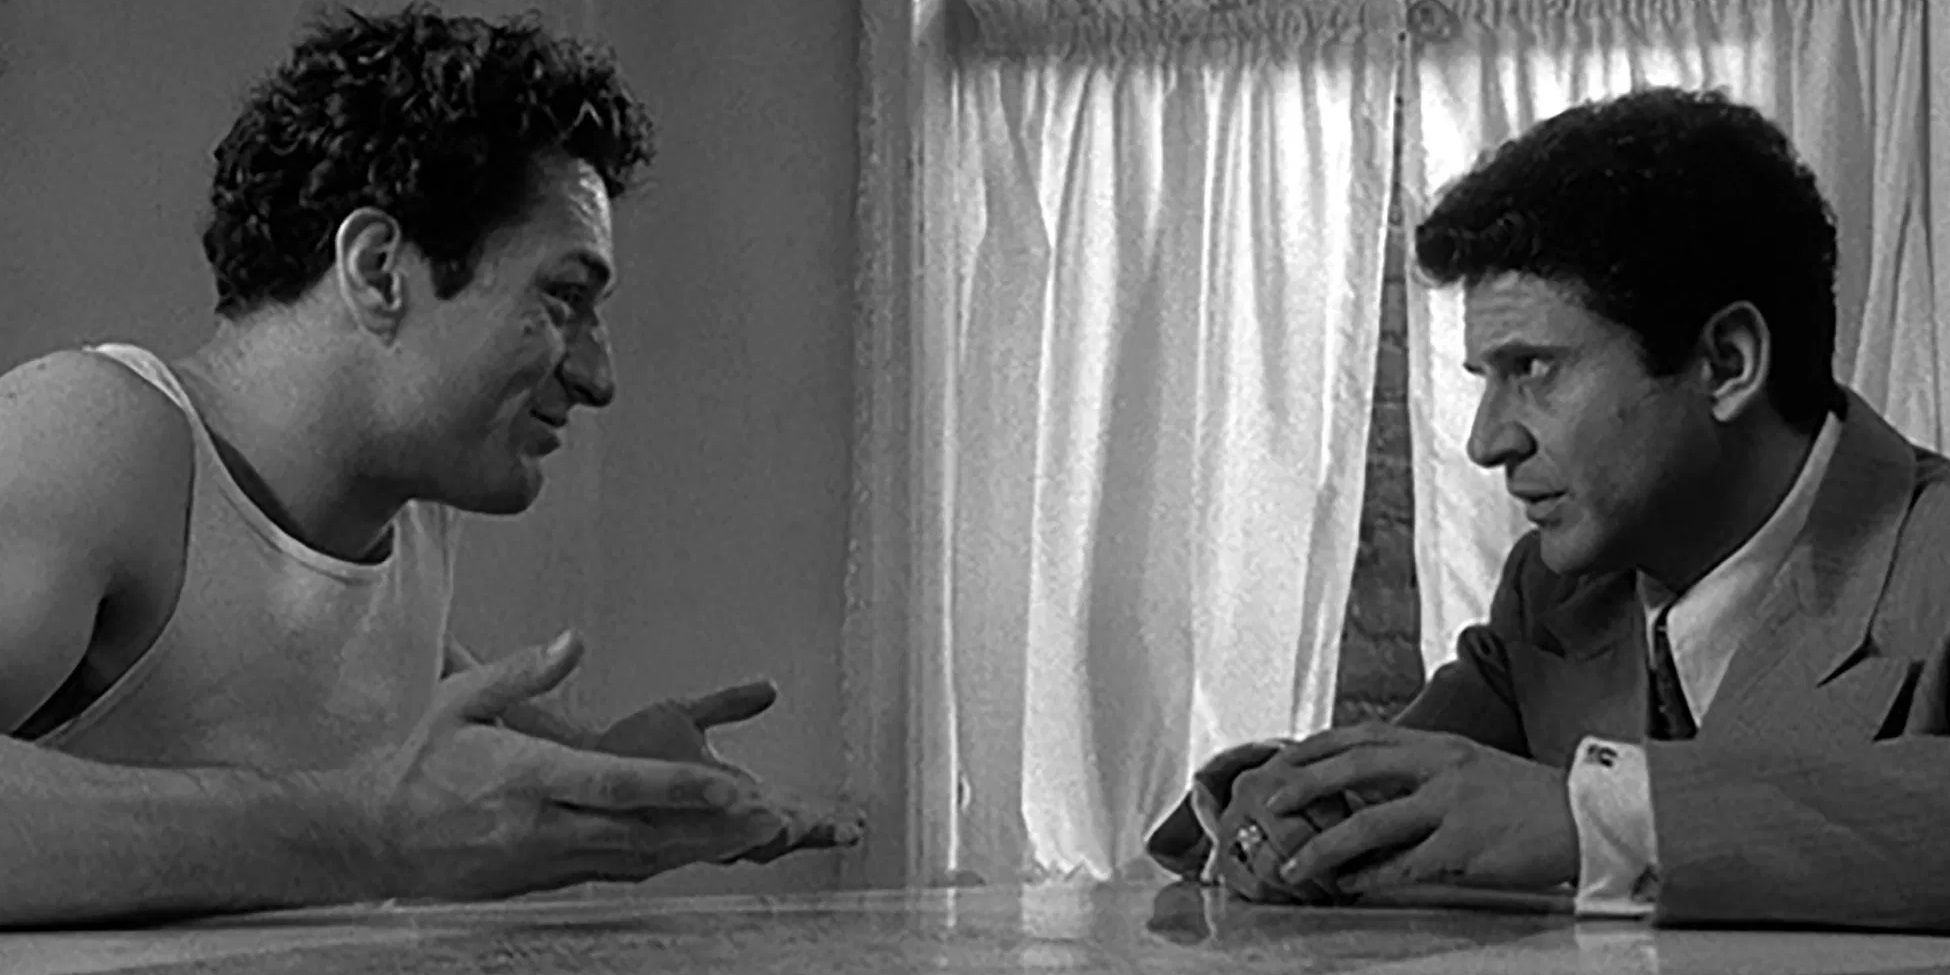 Jake and Joey talk at the dinner table in Raging Bull